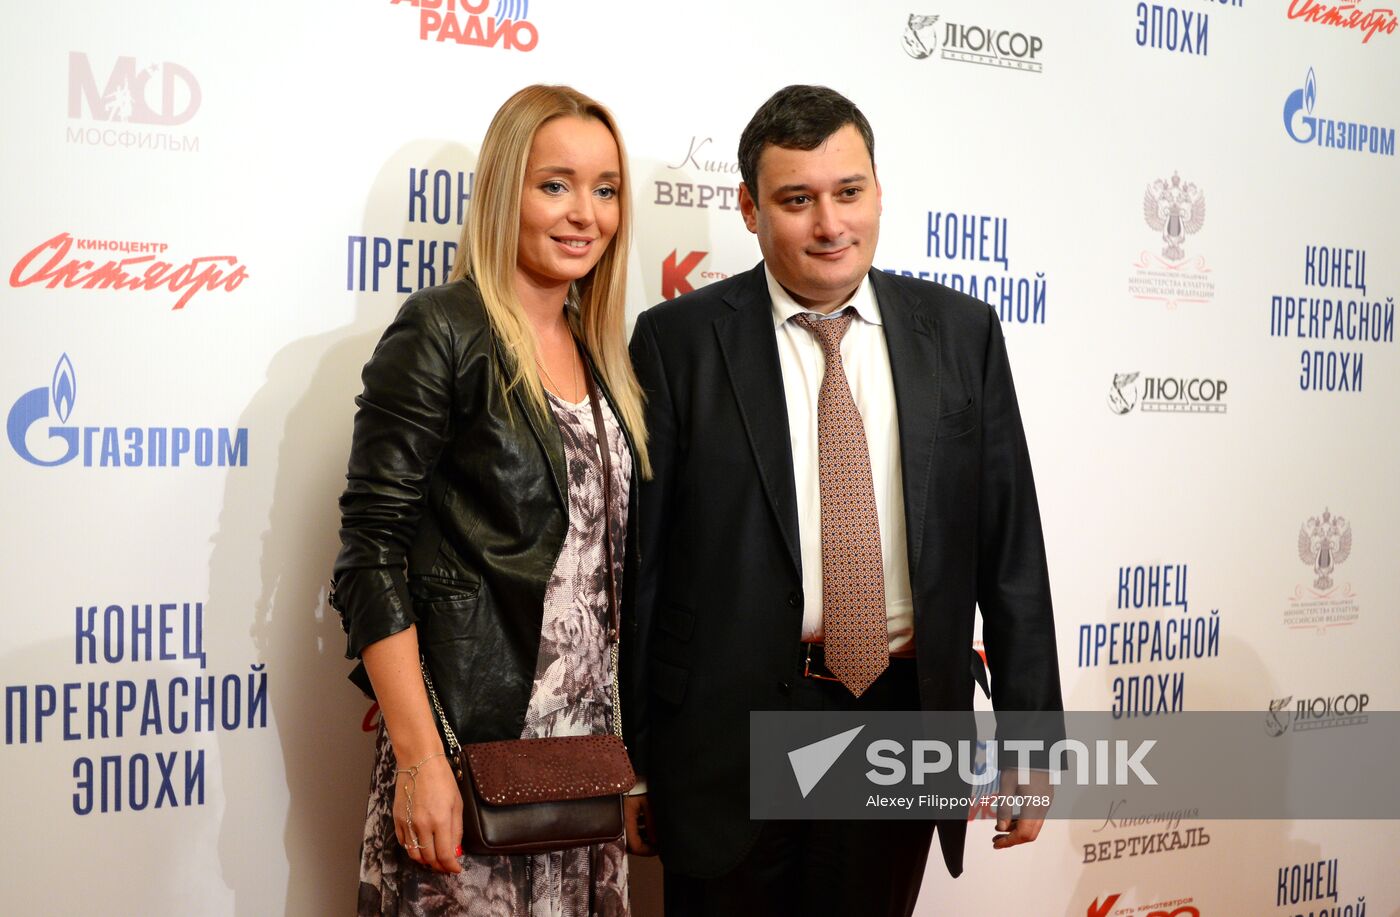 Premiere of Stanislav Govorukhin's new film "The End of a Great Era"